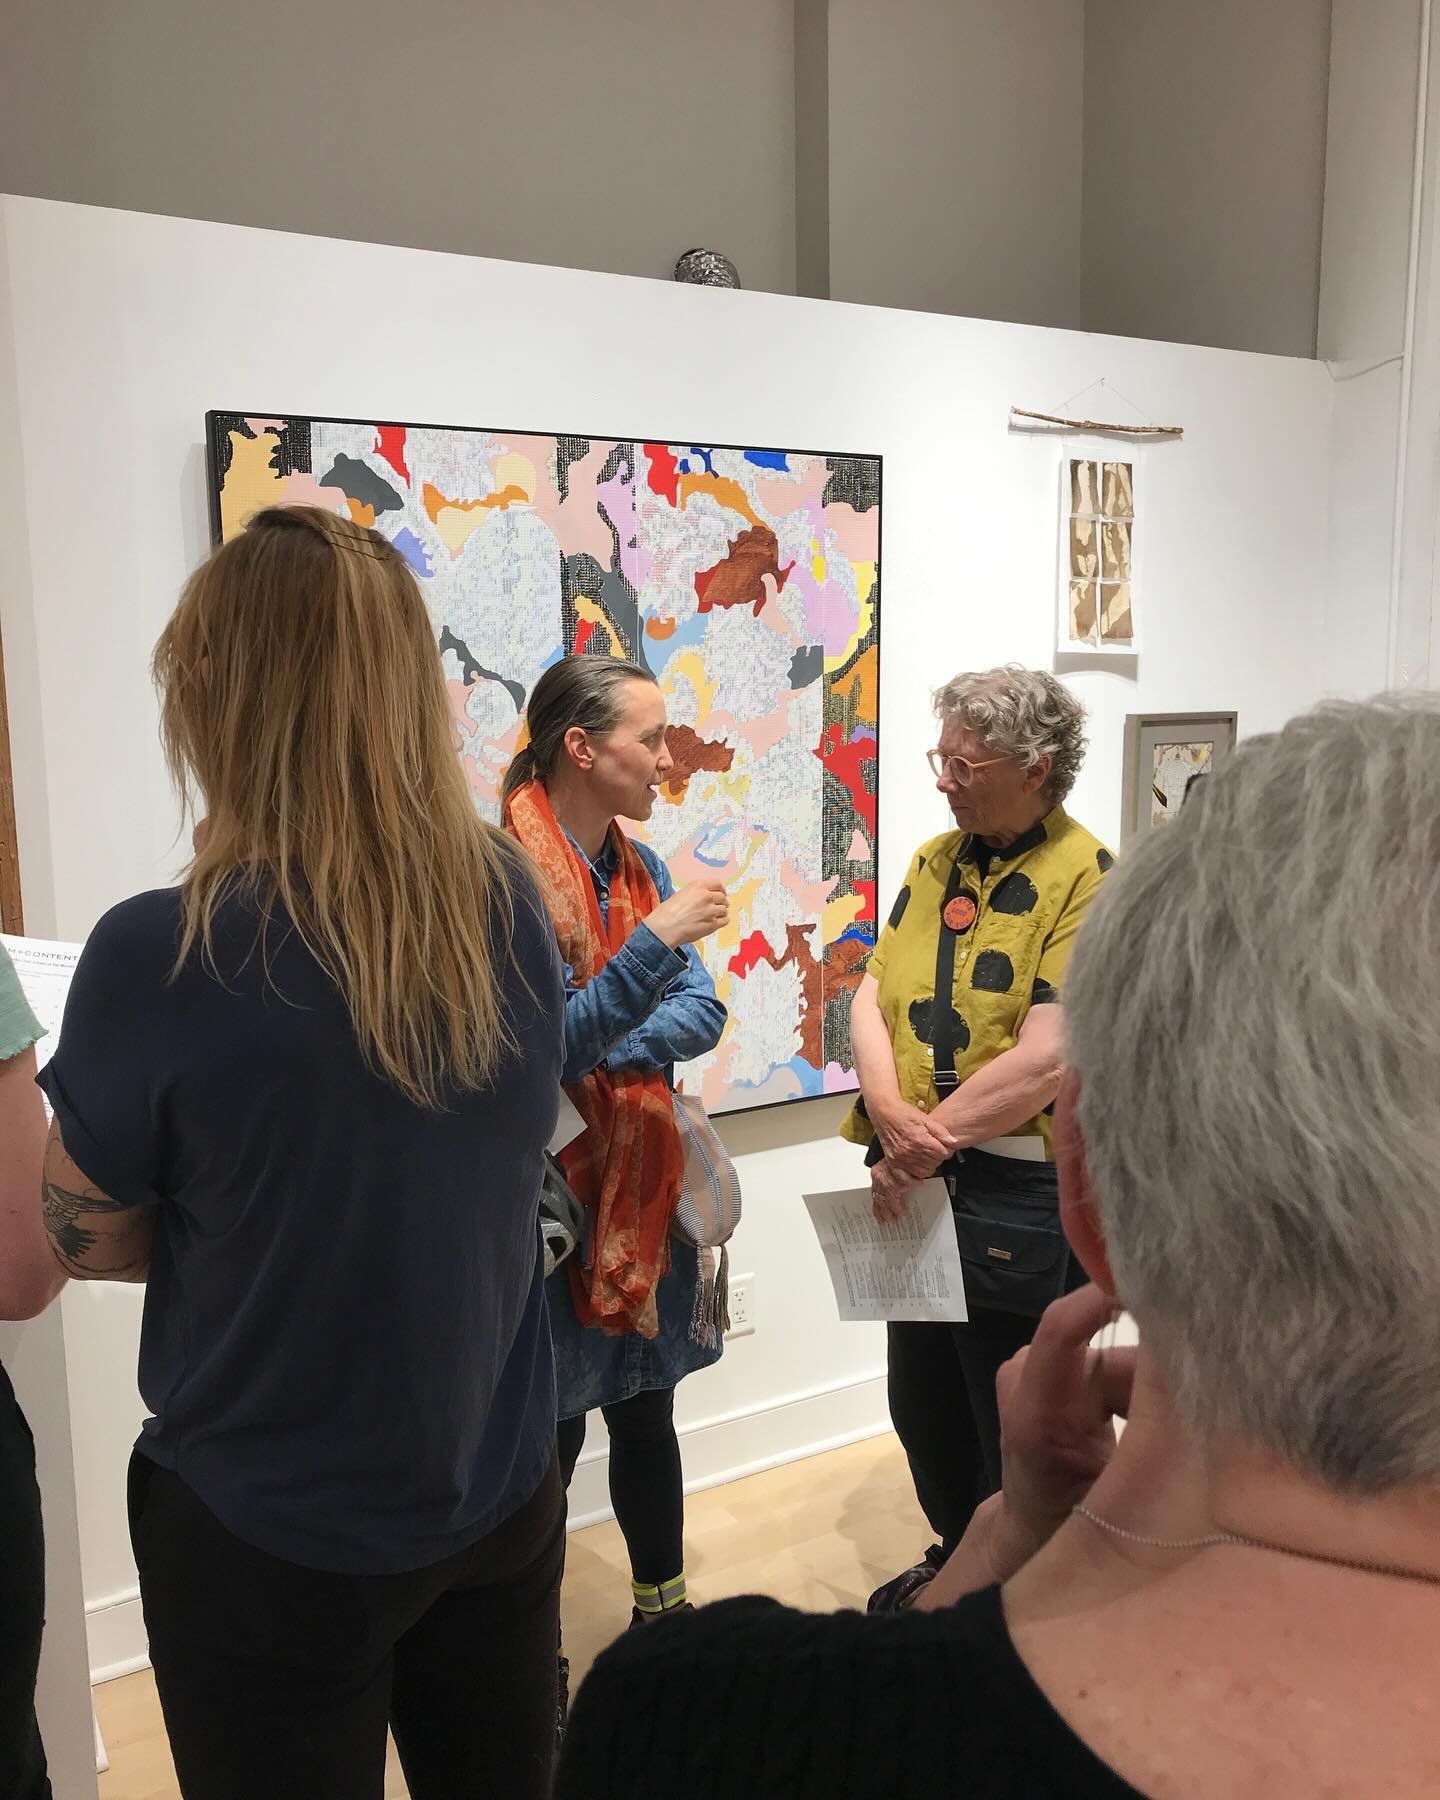 Such a beautiful evening with art and friends! The weather is getting so nice, we hope you can head over and see the show. We&rsquo;re located in the North Loop, inside the Whitney Building at 210 N 2nd Street. 

The current exhibit is What Fierce Lo